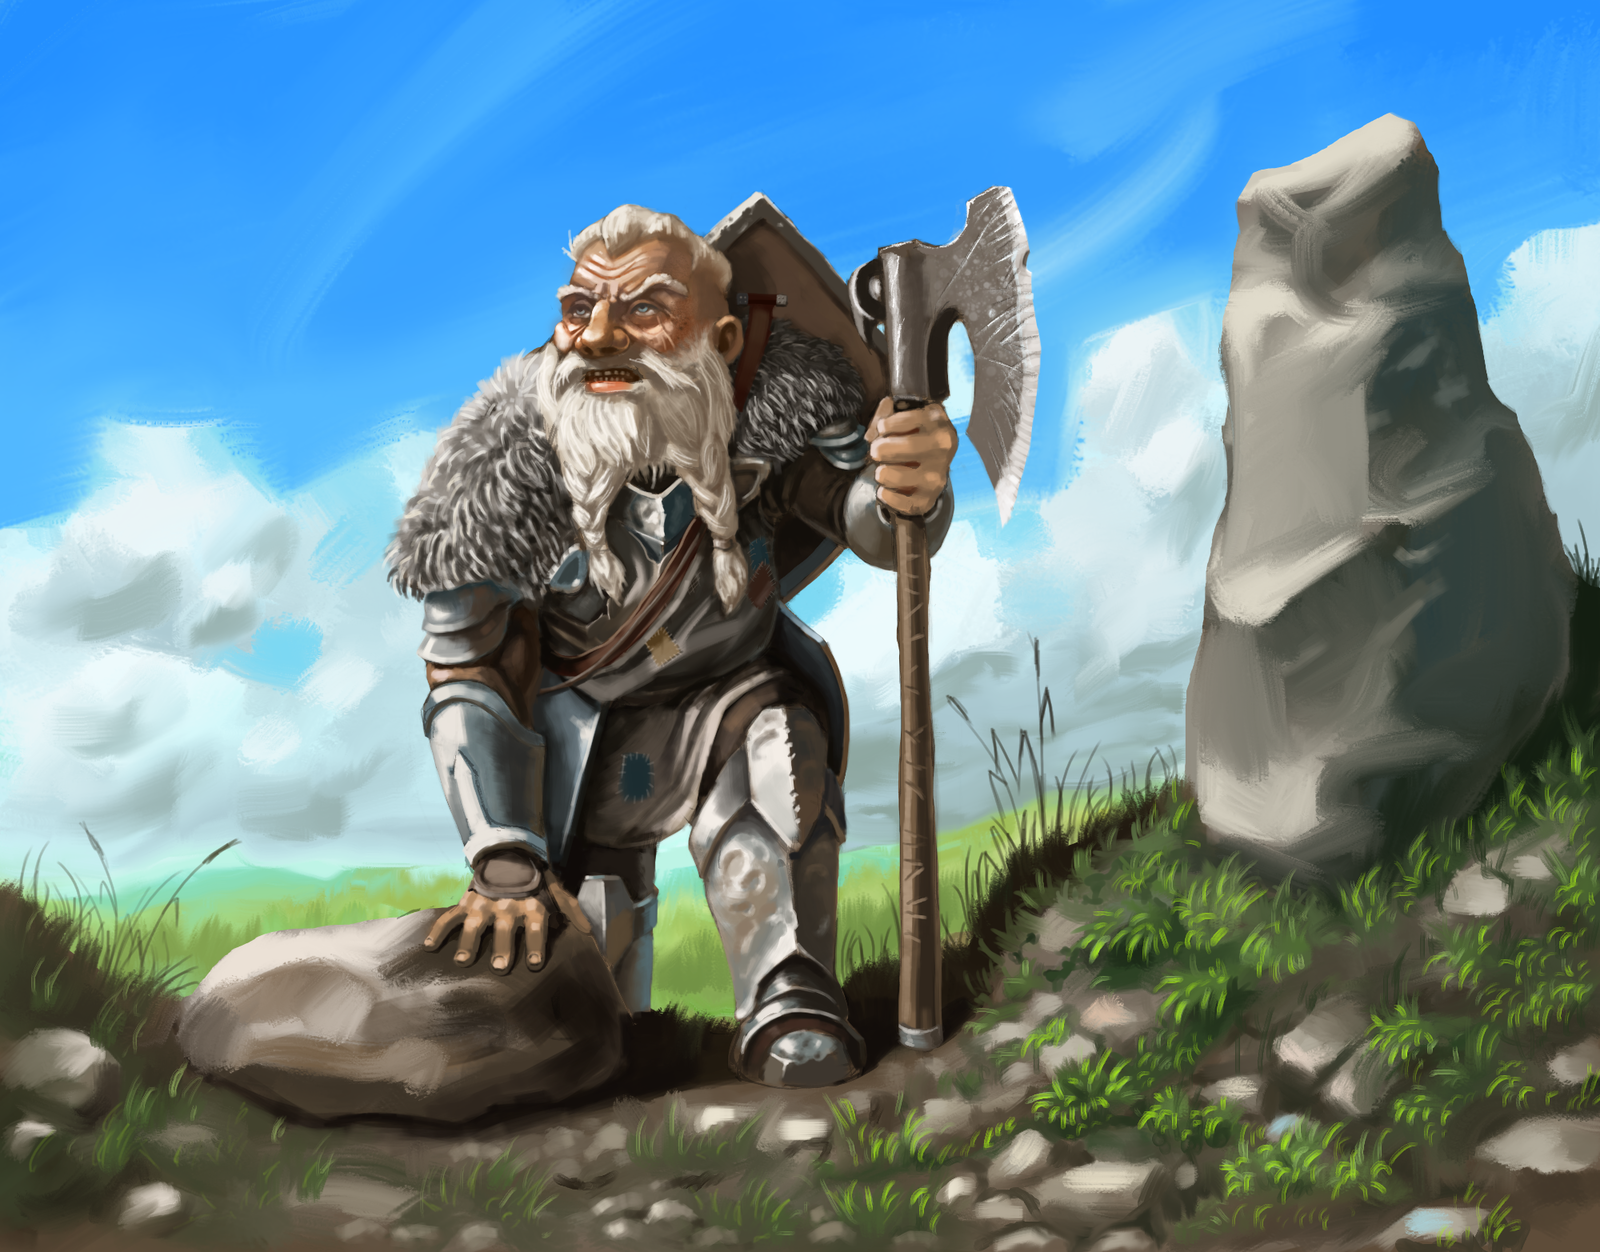 character from the story - My, Fantasy, The author's world, , Dwarf, Story, Art